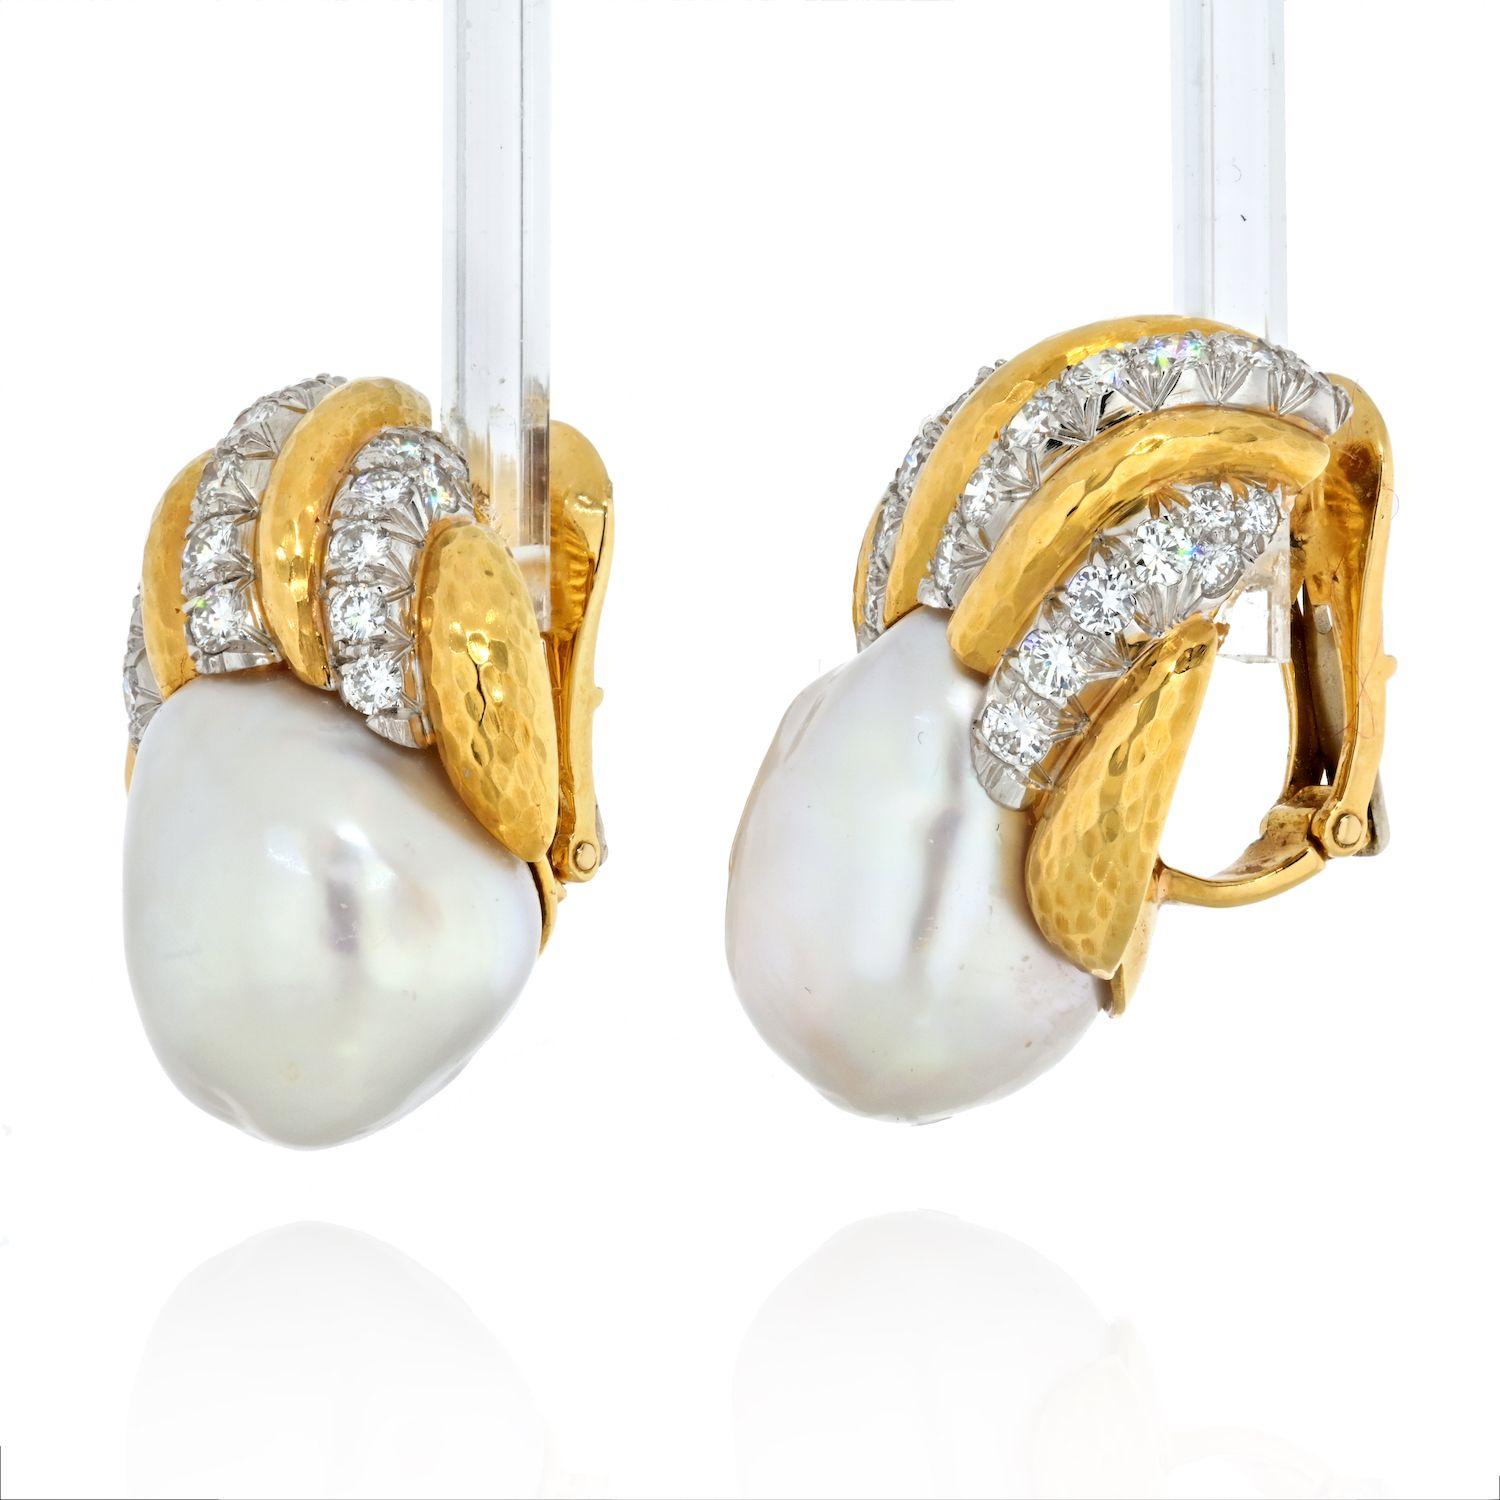 The velvety white South Sea pearls are nestled in earring beds of diamonds and 18kt gold. Crafted by David Webb with the lovely sea motif these earrings are perfect for someone who has a nautical style and loves the sea. Encrusted with approx. 2